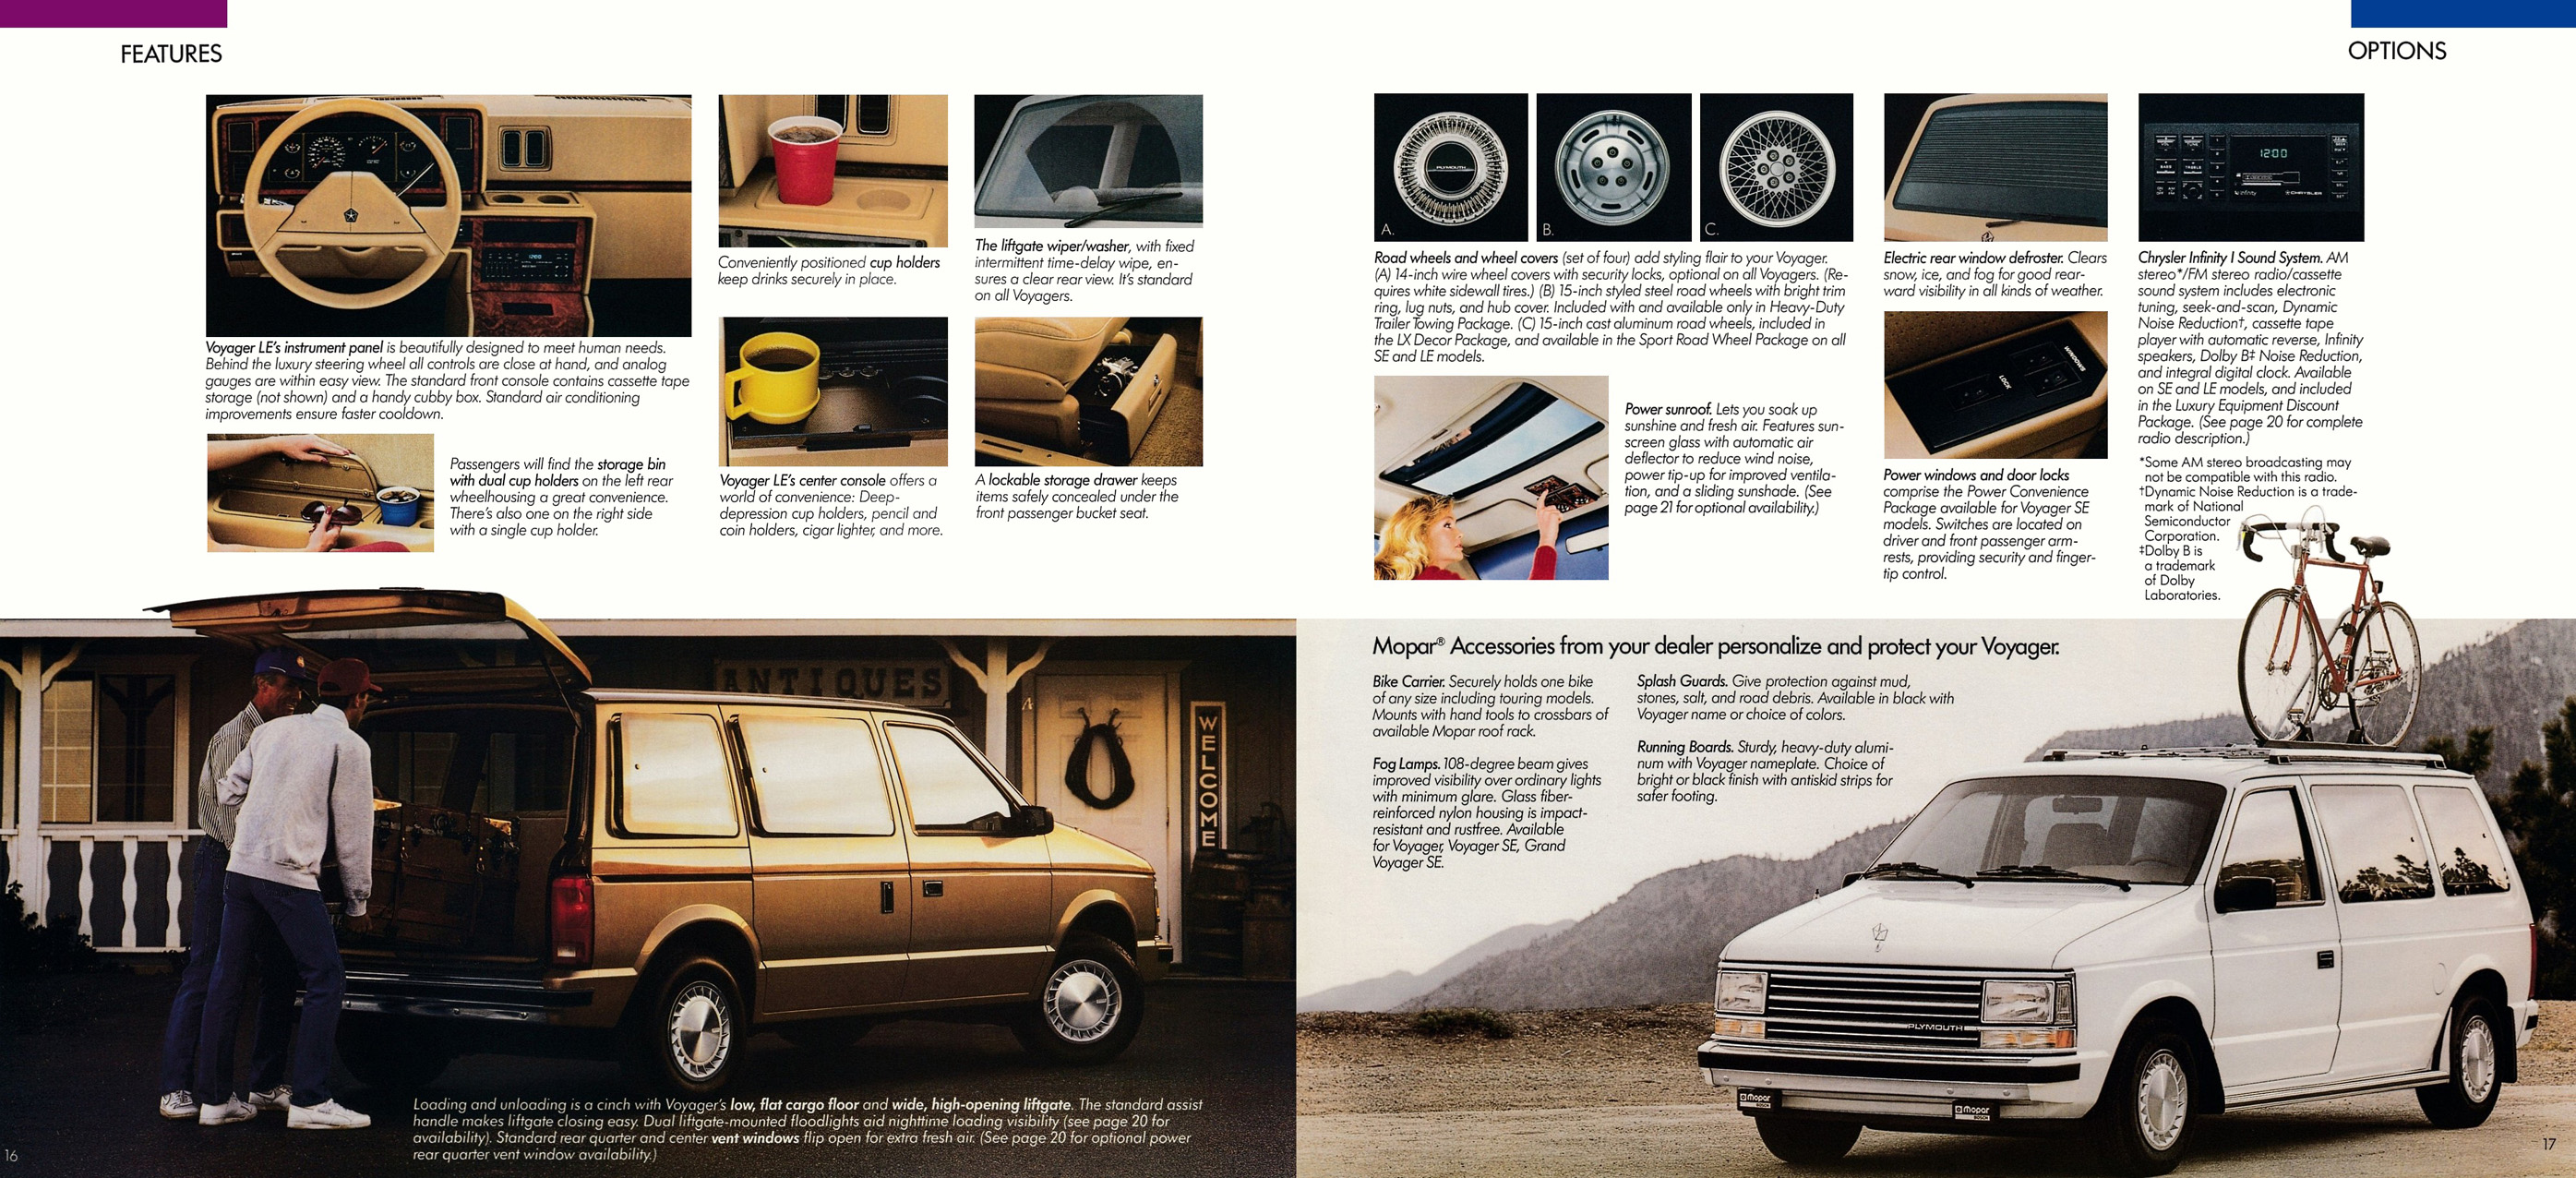 1990 Plymouth Voyager Brochure 16-17